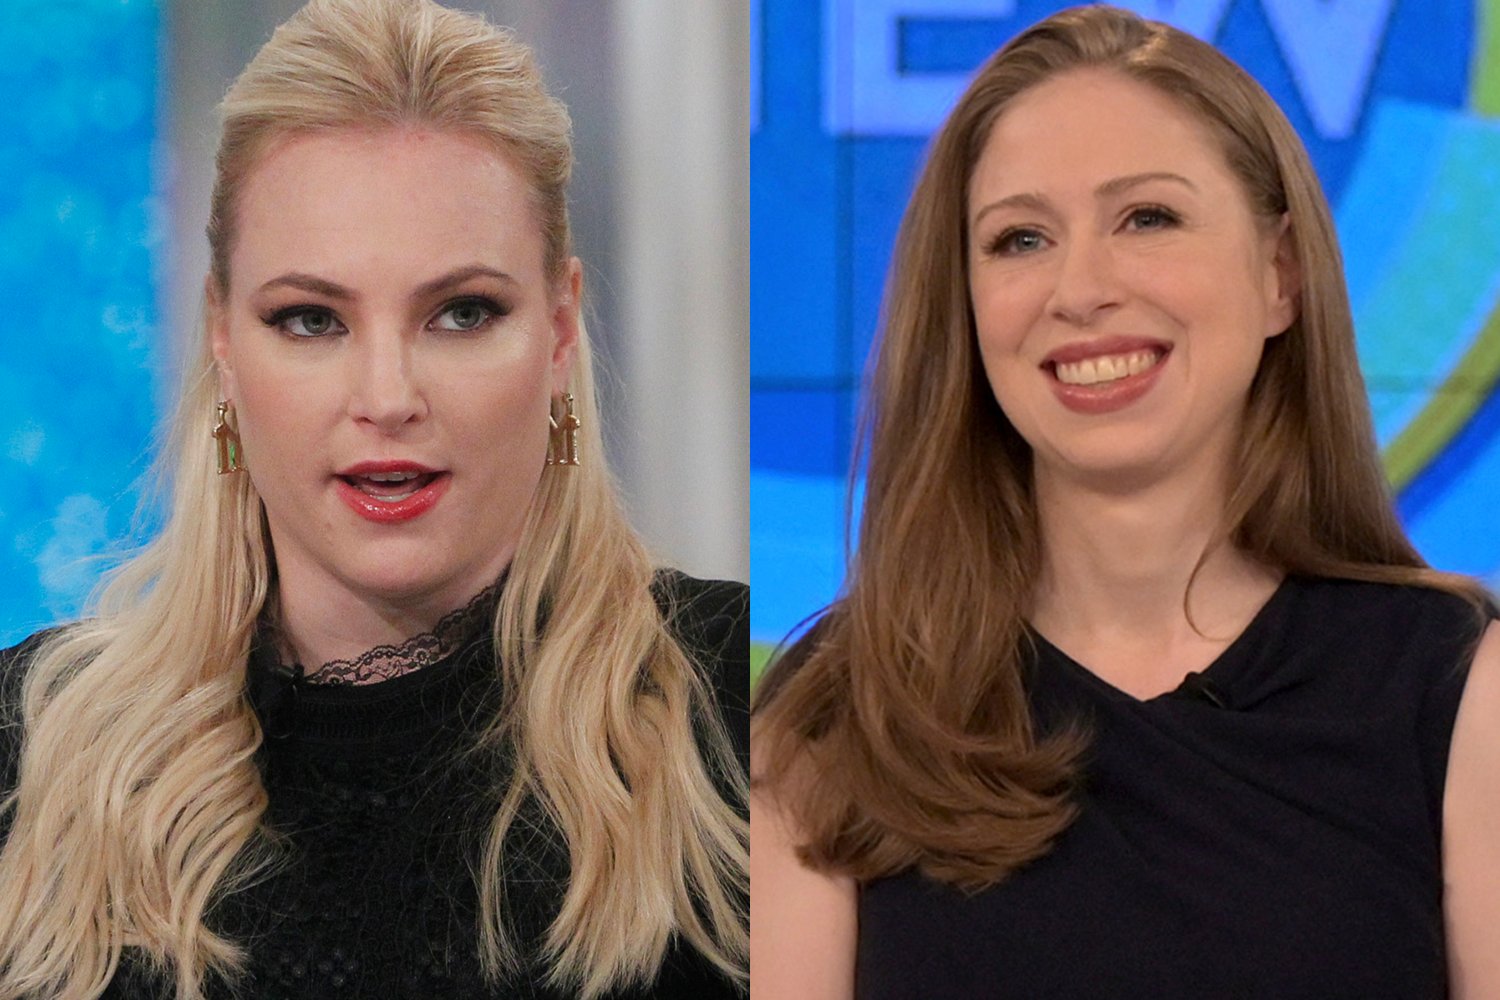 ‘The View’: Meghan McCain Tells Chelsea Clinton To ‘Lighten up’ After Tweeting Shady Photo of Hillary Clinton